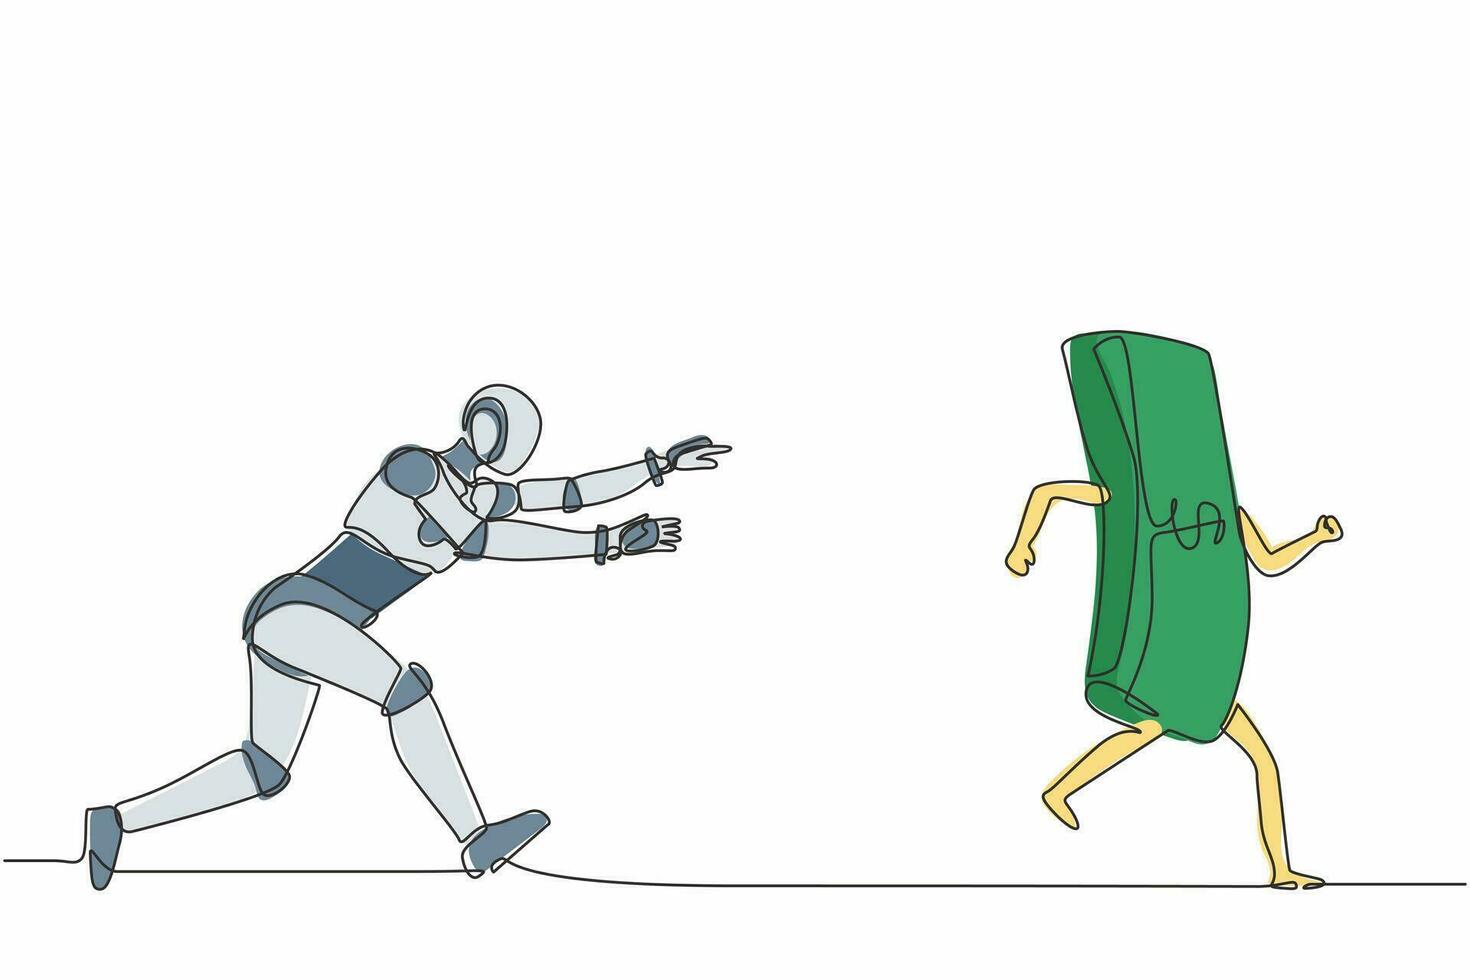 Single one line drawing robot running and chasing after run away money. Future technology development. Artificial intelligence and machine learning. Continuous line design graphic vector illustration